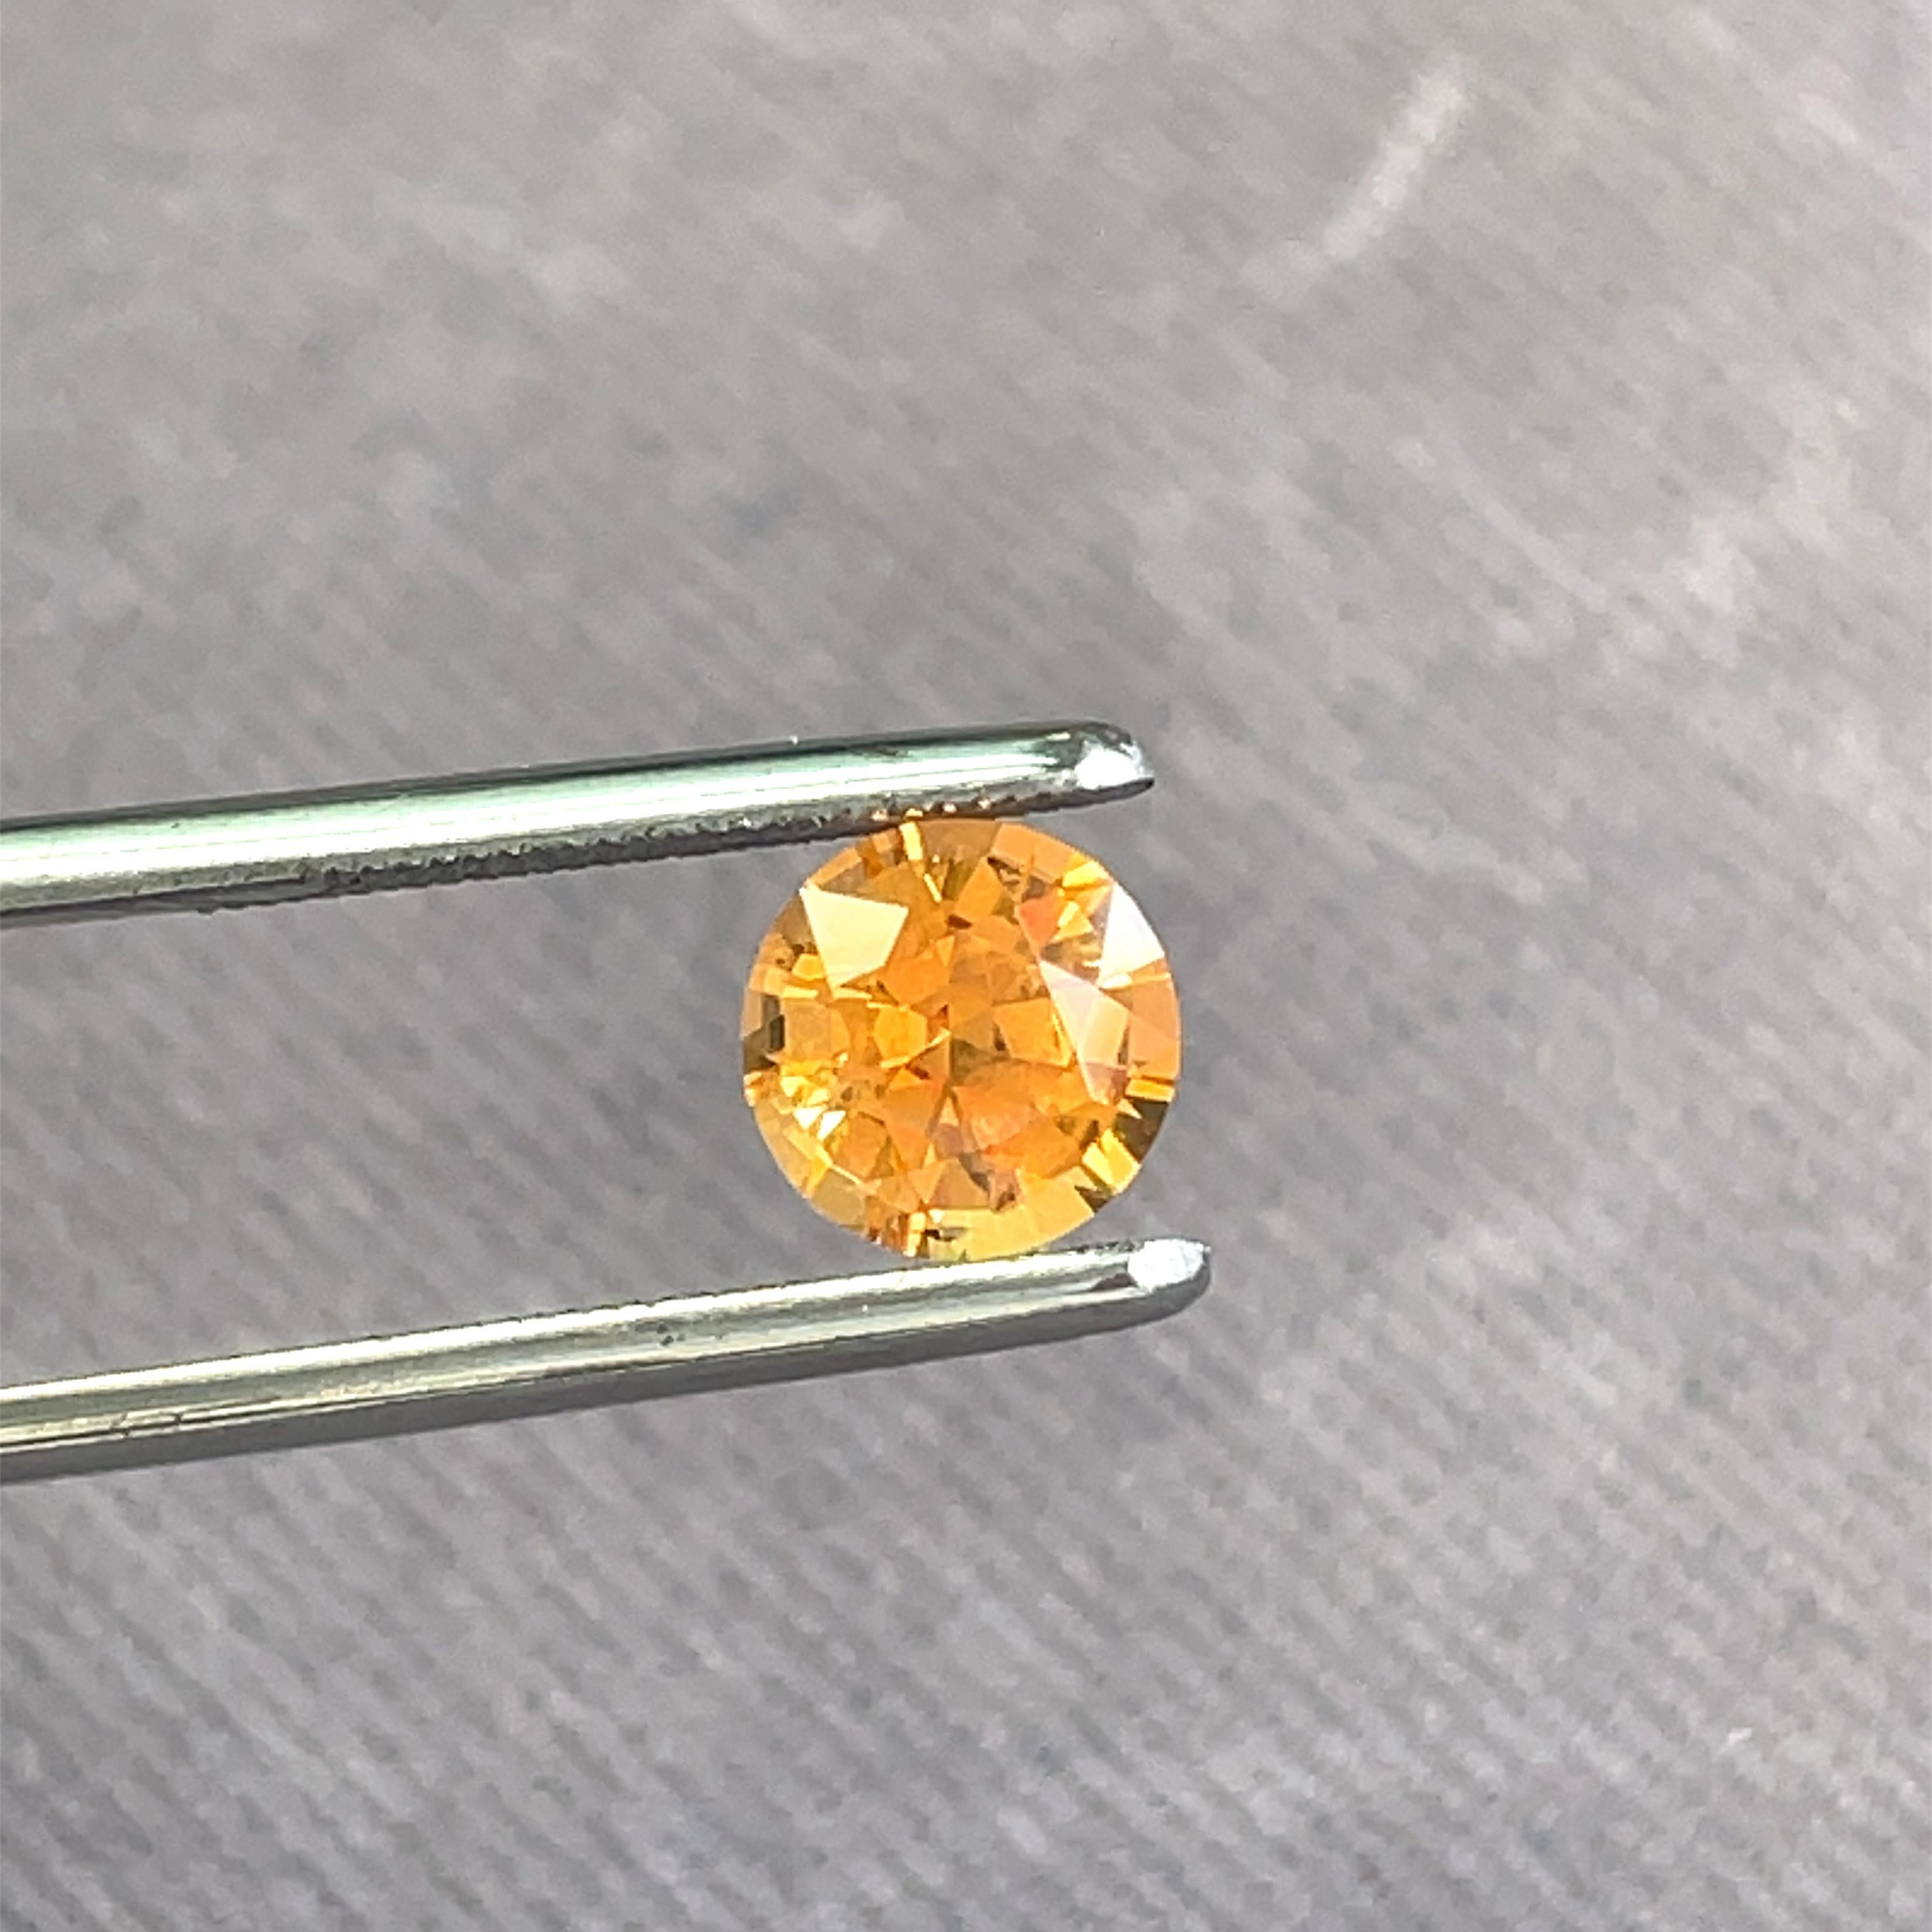 2 Round Mandarin Garnet Gemstones Cts 3.28 In New Condition For Sale In Hong Kong, HK